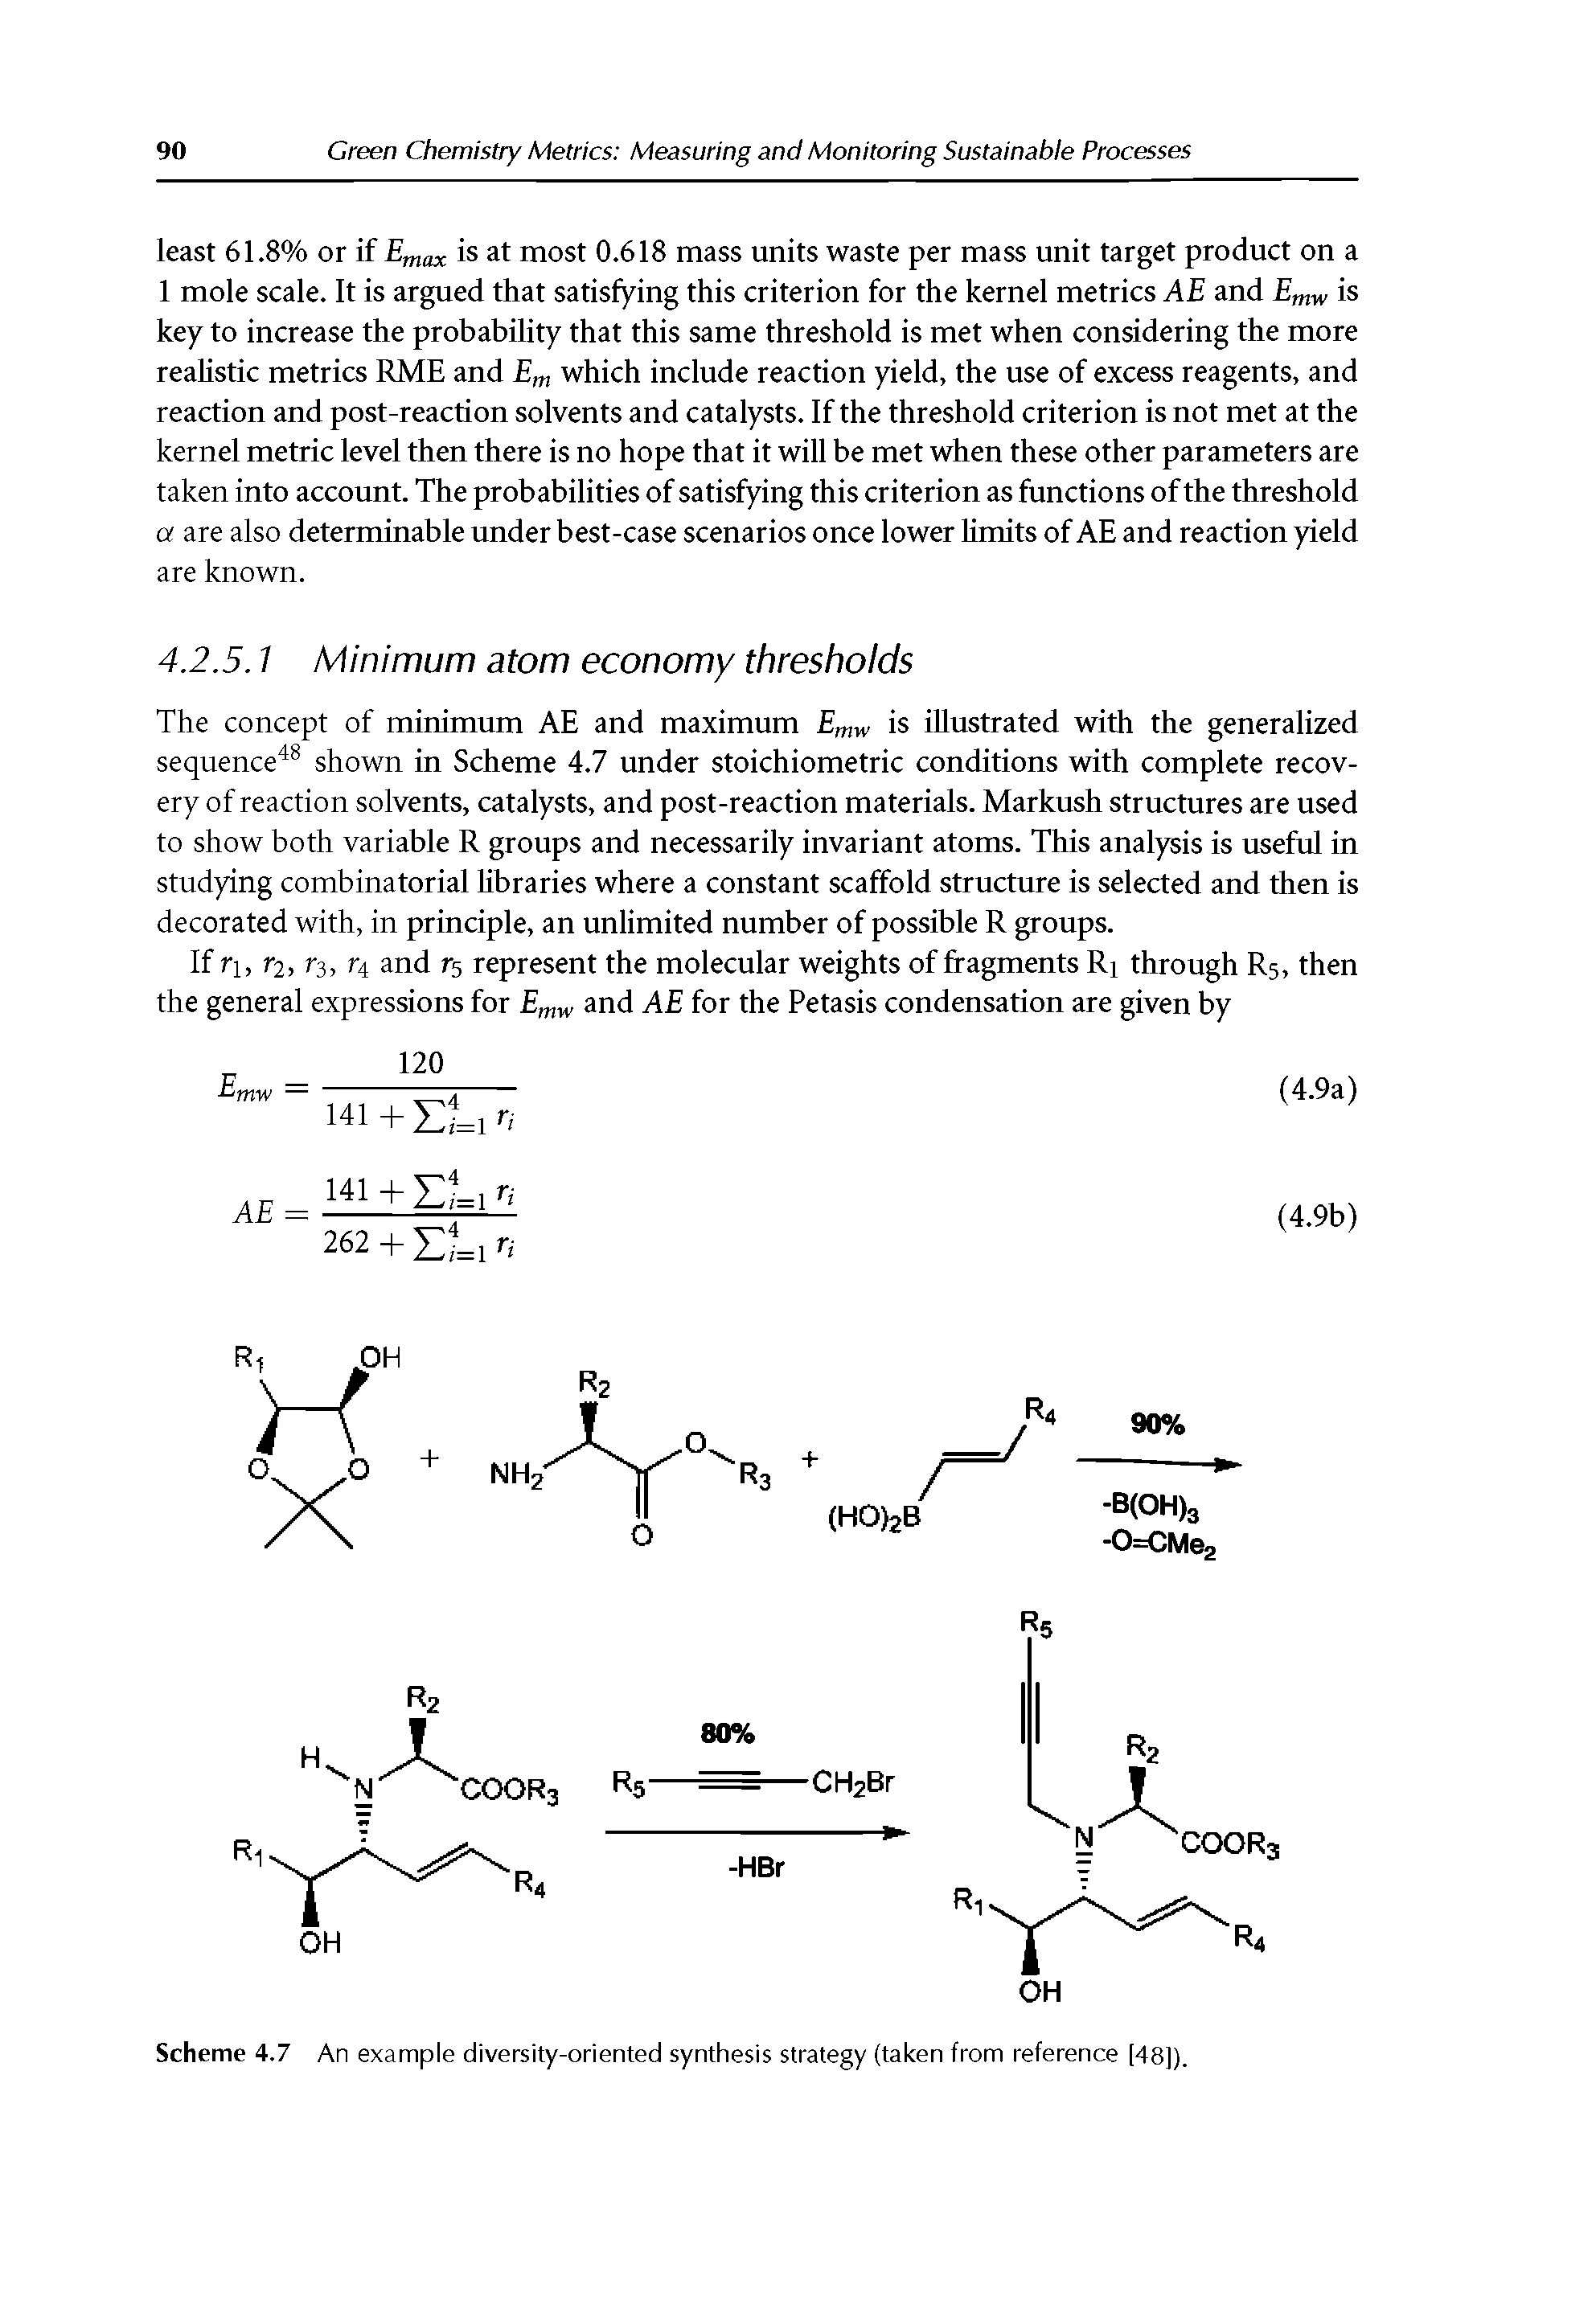 Scheme 4.7 An example diversity-oriented synthesis strategy (taken from reference [48]).